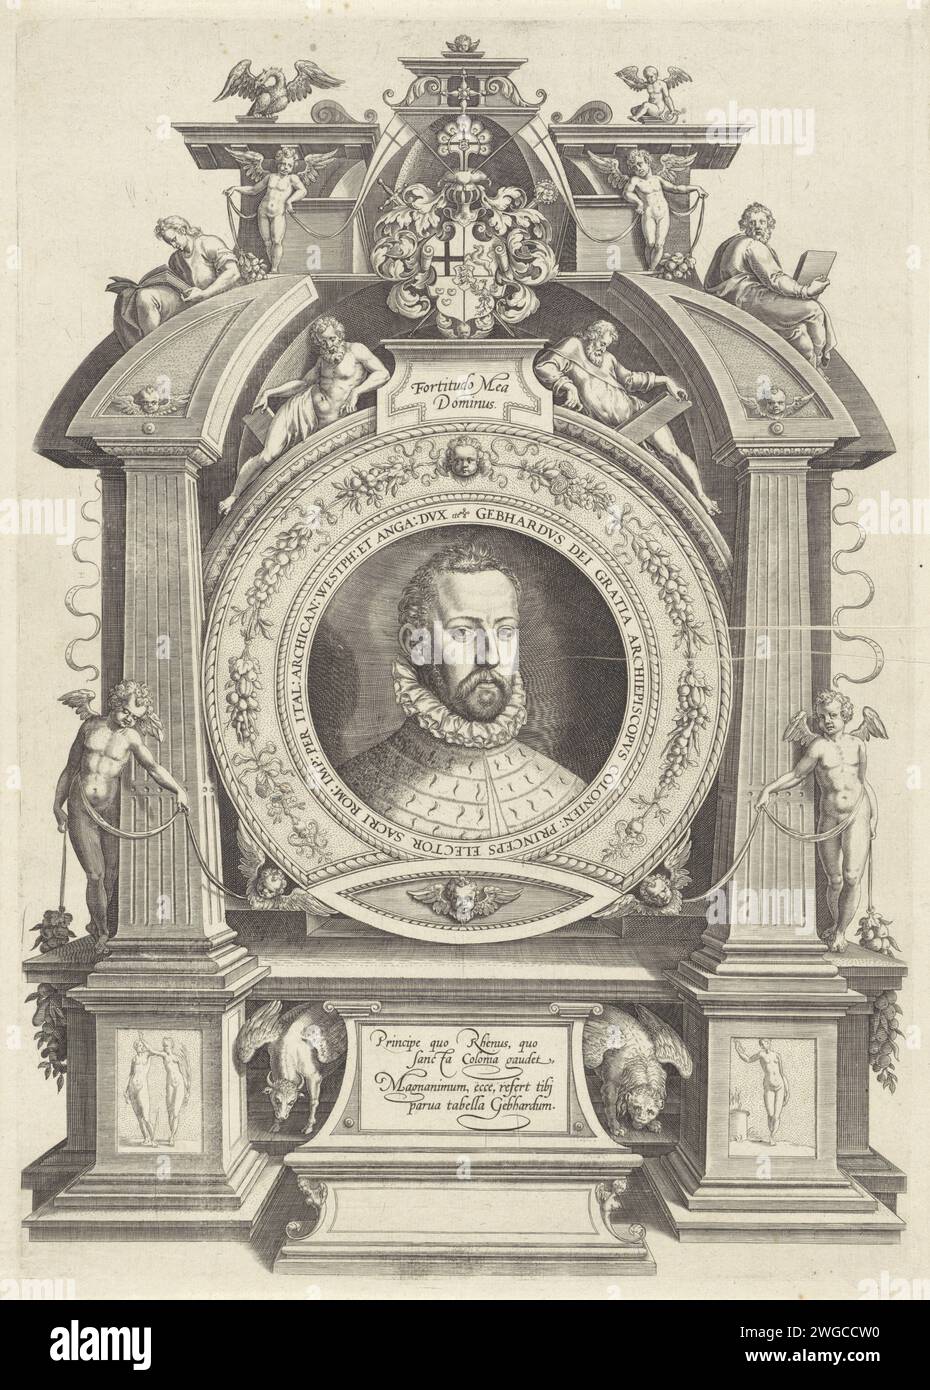 PortraT van Gebhard Truchsess von Waldburg -Truchburg, Johann Sadeler (I), 1577 - 1600 print Bard Truchsess von Waldburg-Trauchburg, Archbishop and Elector of Cologne. Bust in a round list of edge script and flower vines, contained in architectural frame with four prophets at the top. In the middle of the weapon of Waldburg, flanked by Putti, with the Latin text 'Fortitudo Mea Dominus' in a cartouche. Up and below the symbols of the evangelists. Germany paper engraving neck-gear  clothing (with NAME) (+ men's clothes). armorial bearing, heraldry. archbishop, bishop, etc. (Roman Catholic). the Stock Photo